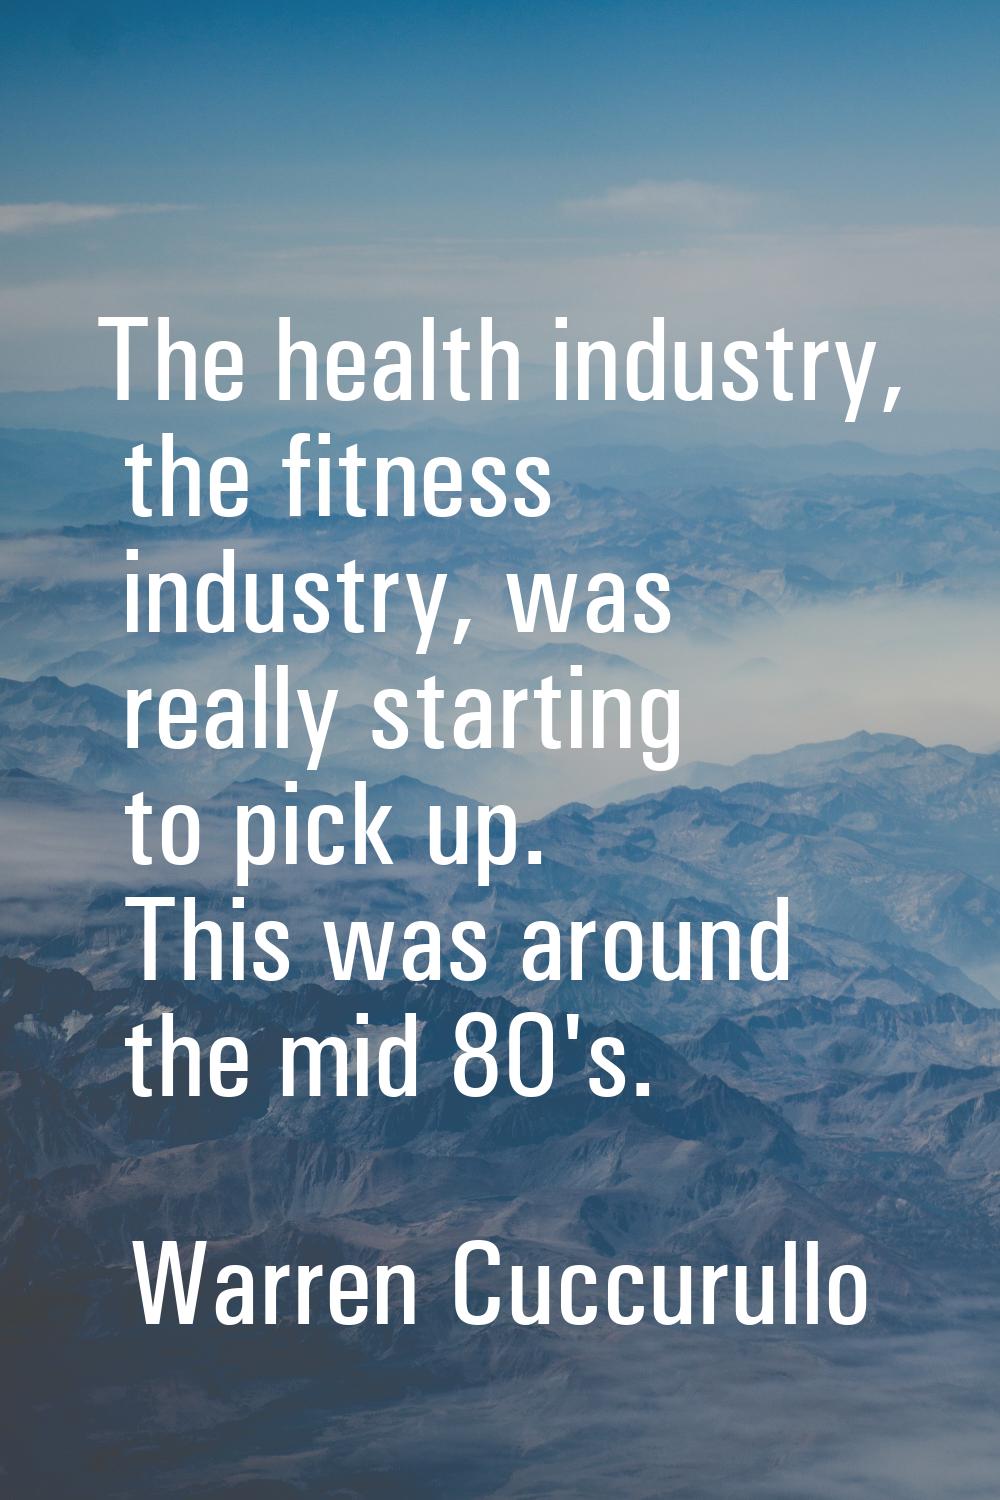 The health industry, the fitness industry, was really starting to pick up. This was around the mid 